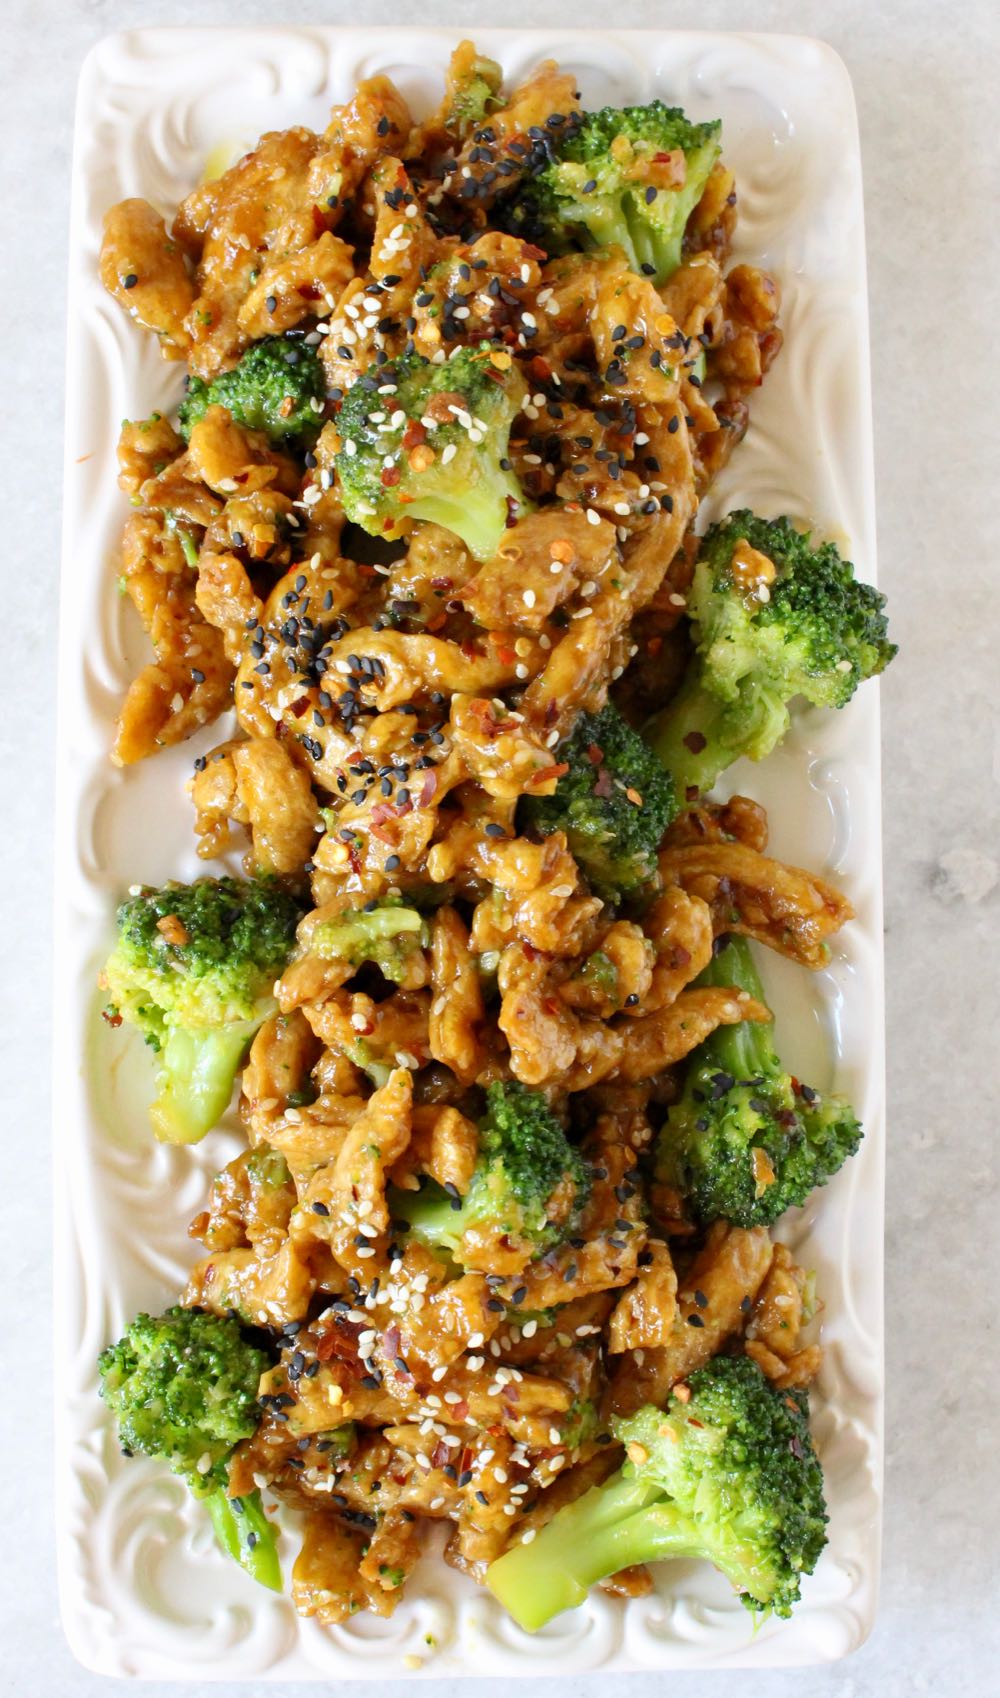 Vegan chicken with broccoli in a garlic ginger sauce on serving platter.